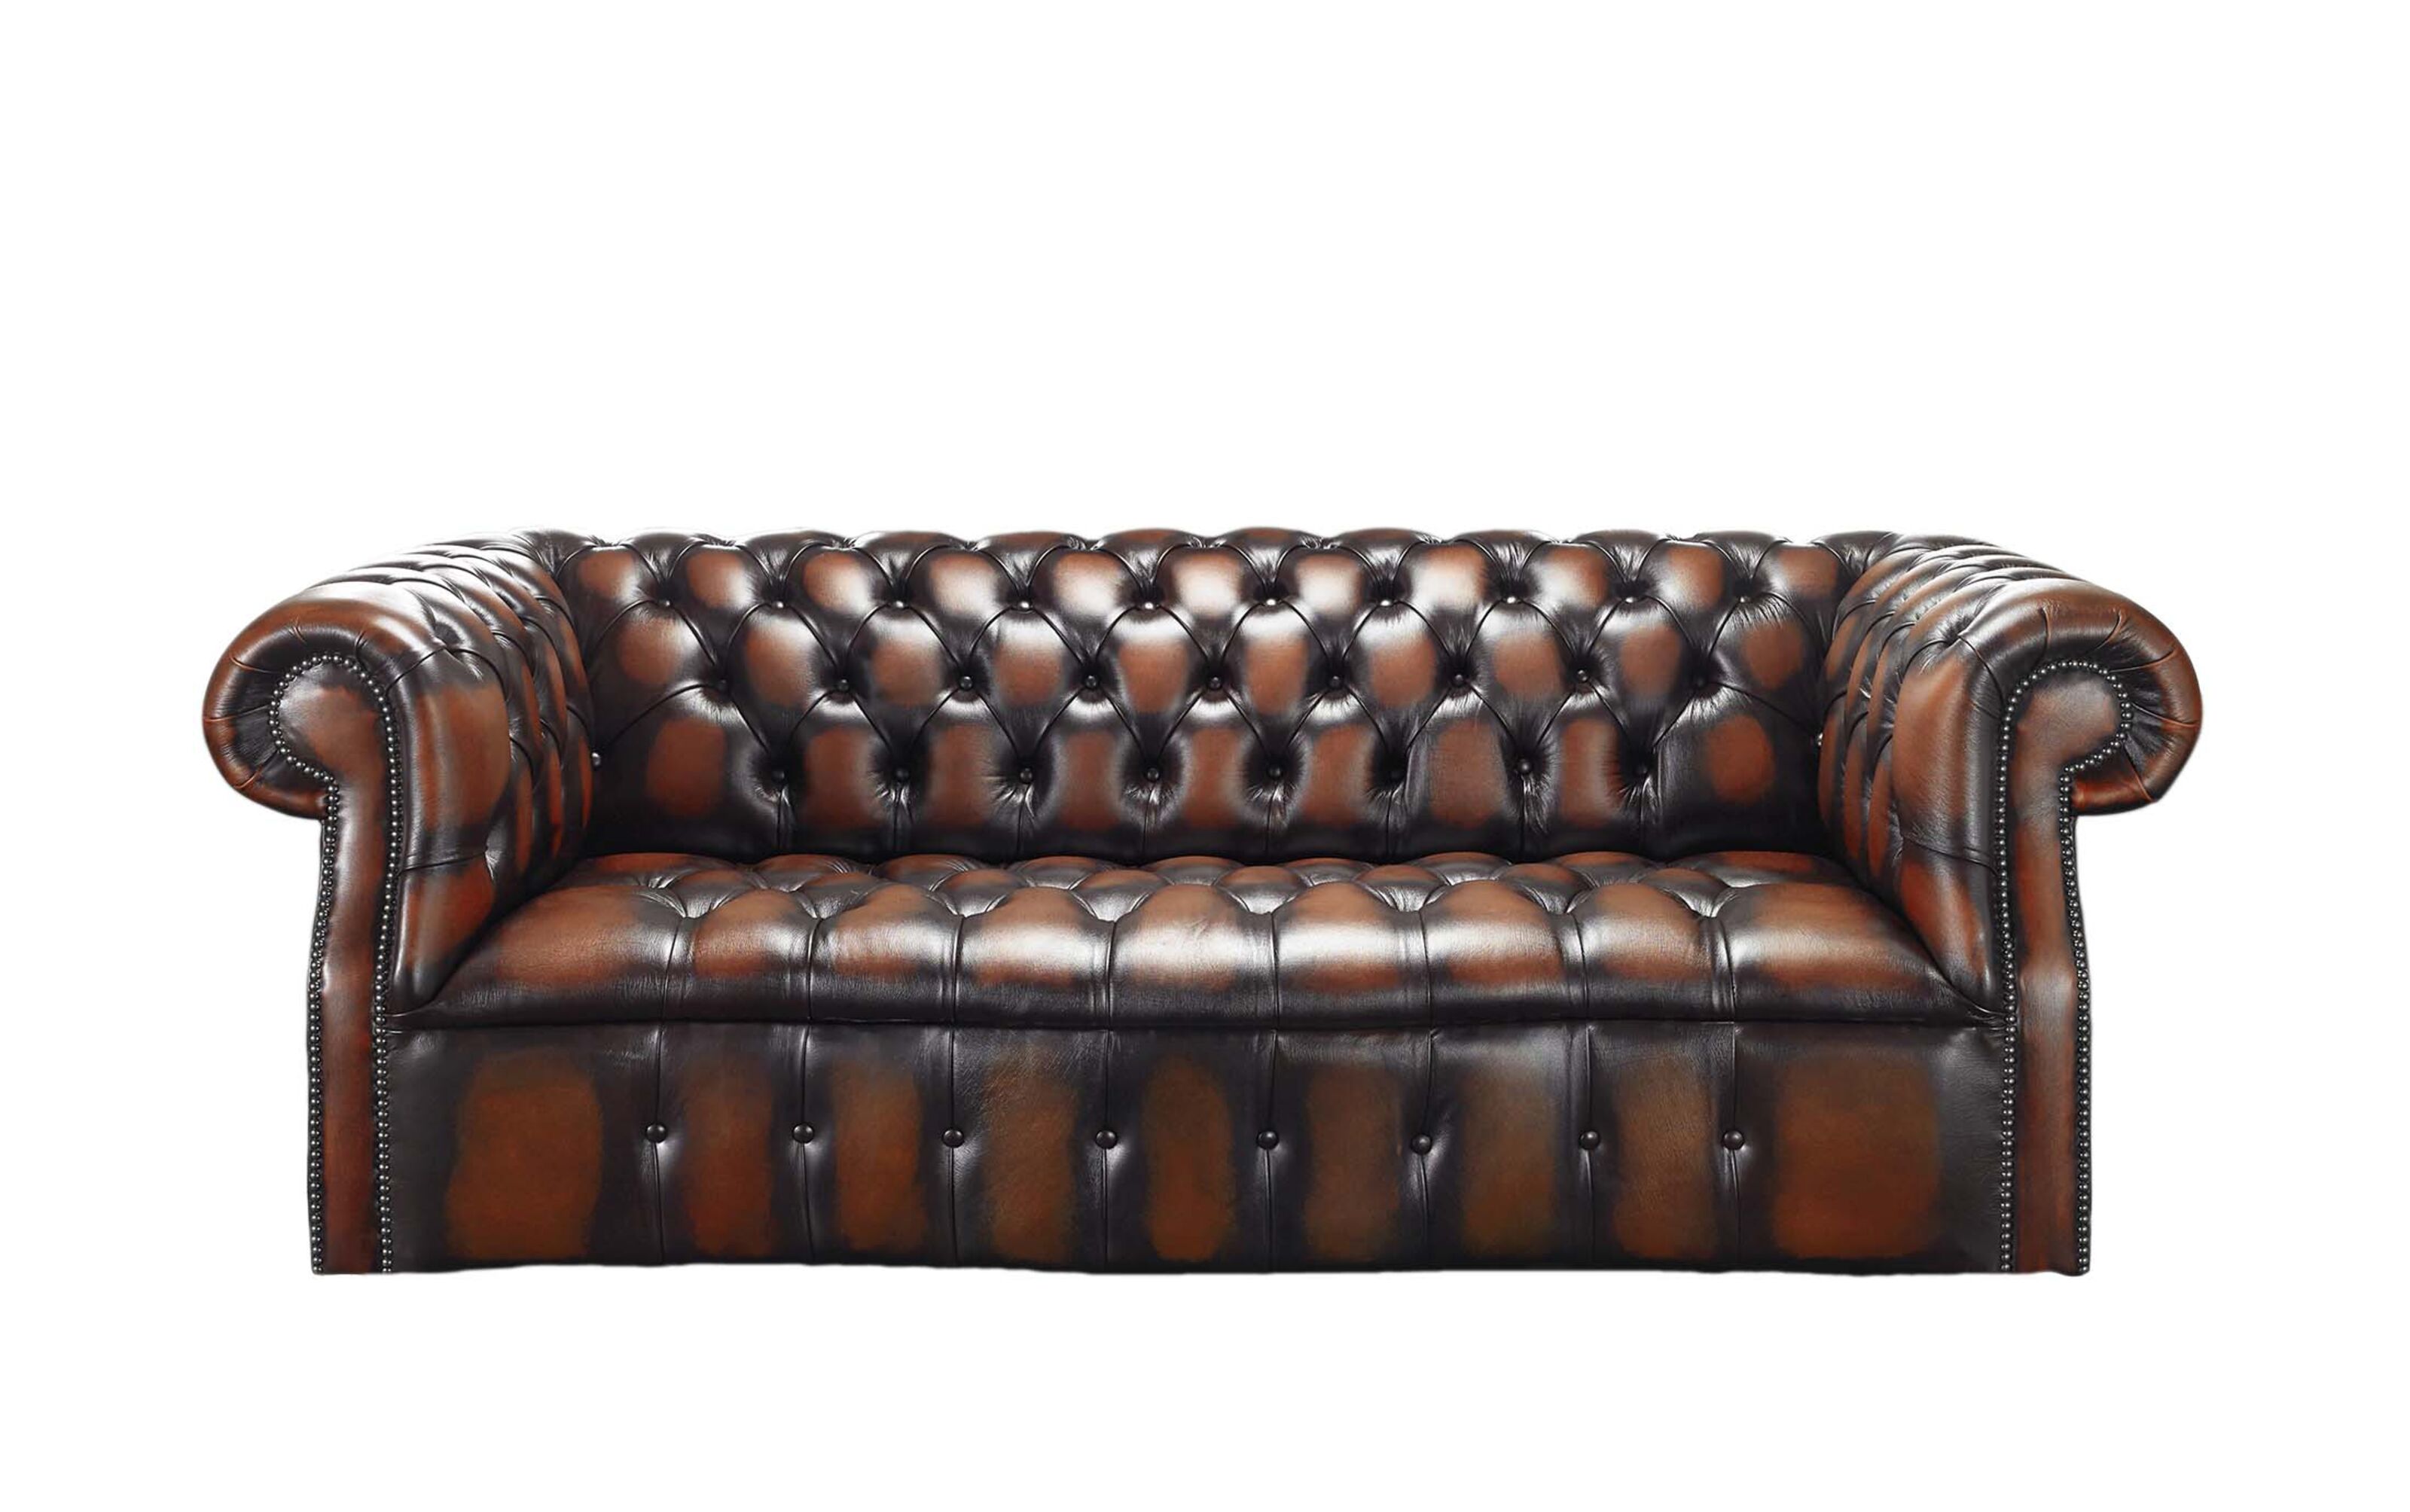 Discover Tranquility with a Classic Chesterfield Sofa  %Post Title